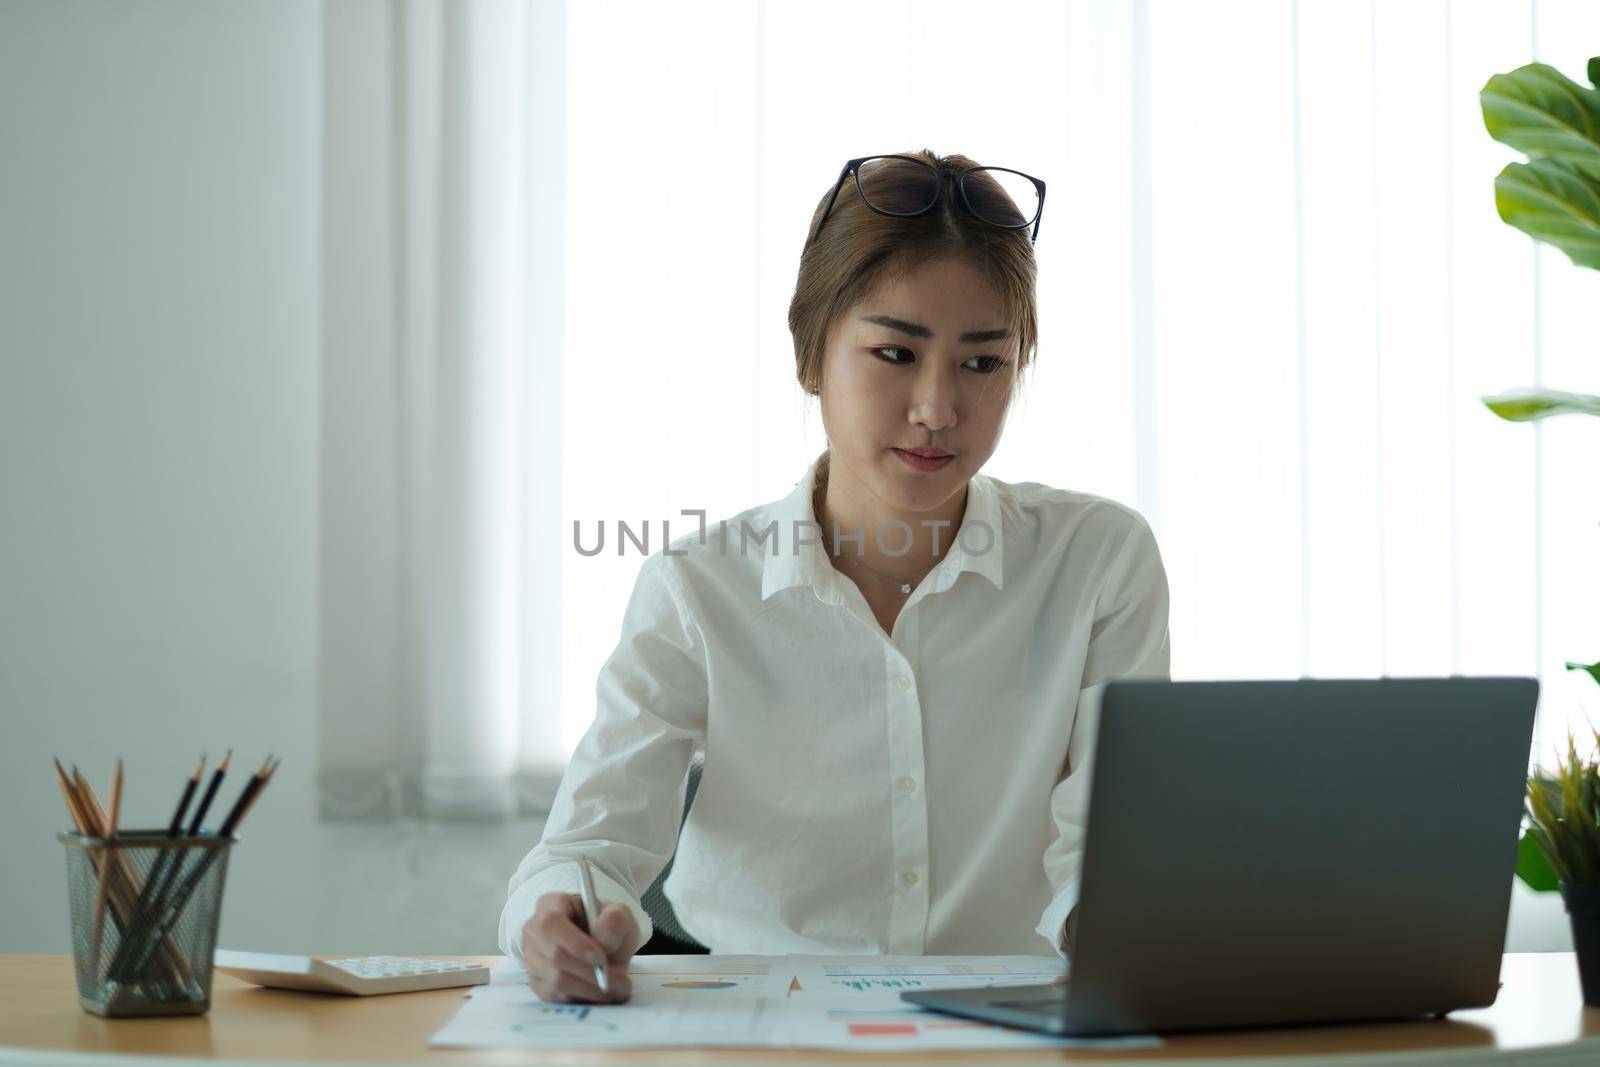 Woman accountant use calculator and computer with holding pen on desk in office. finance and accounting concept.